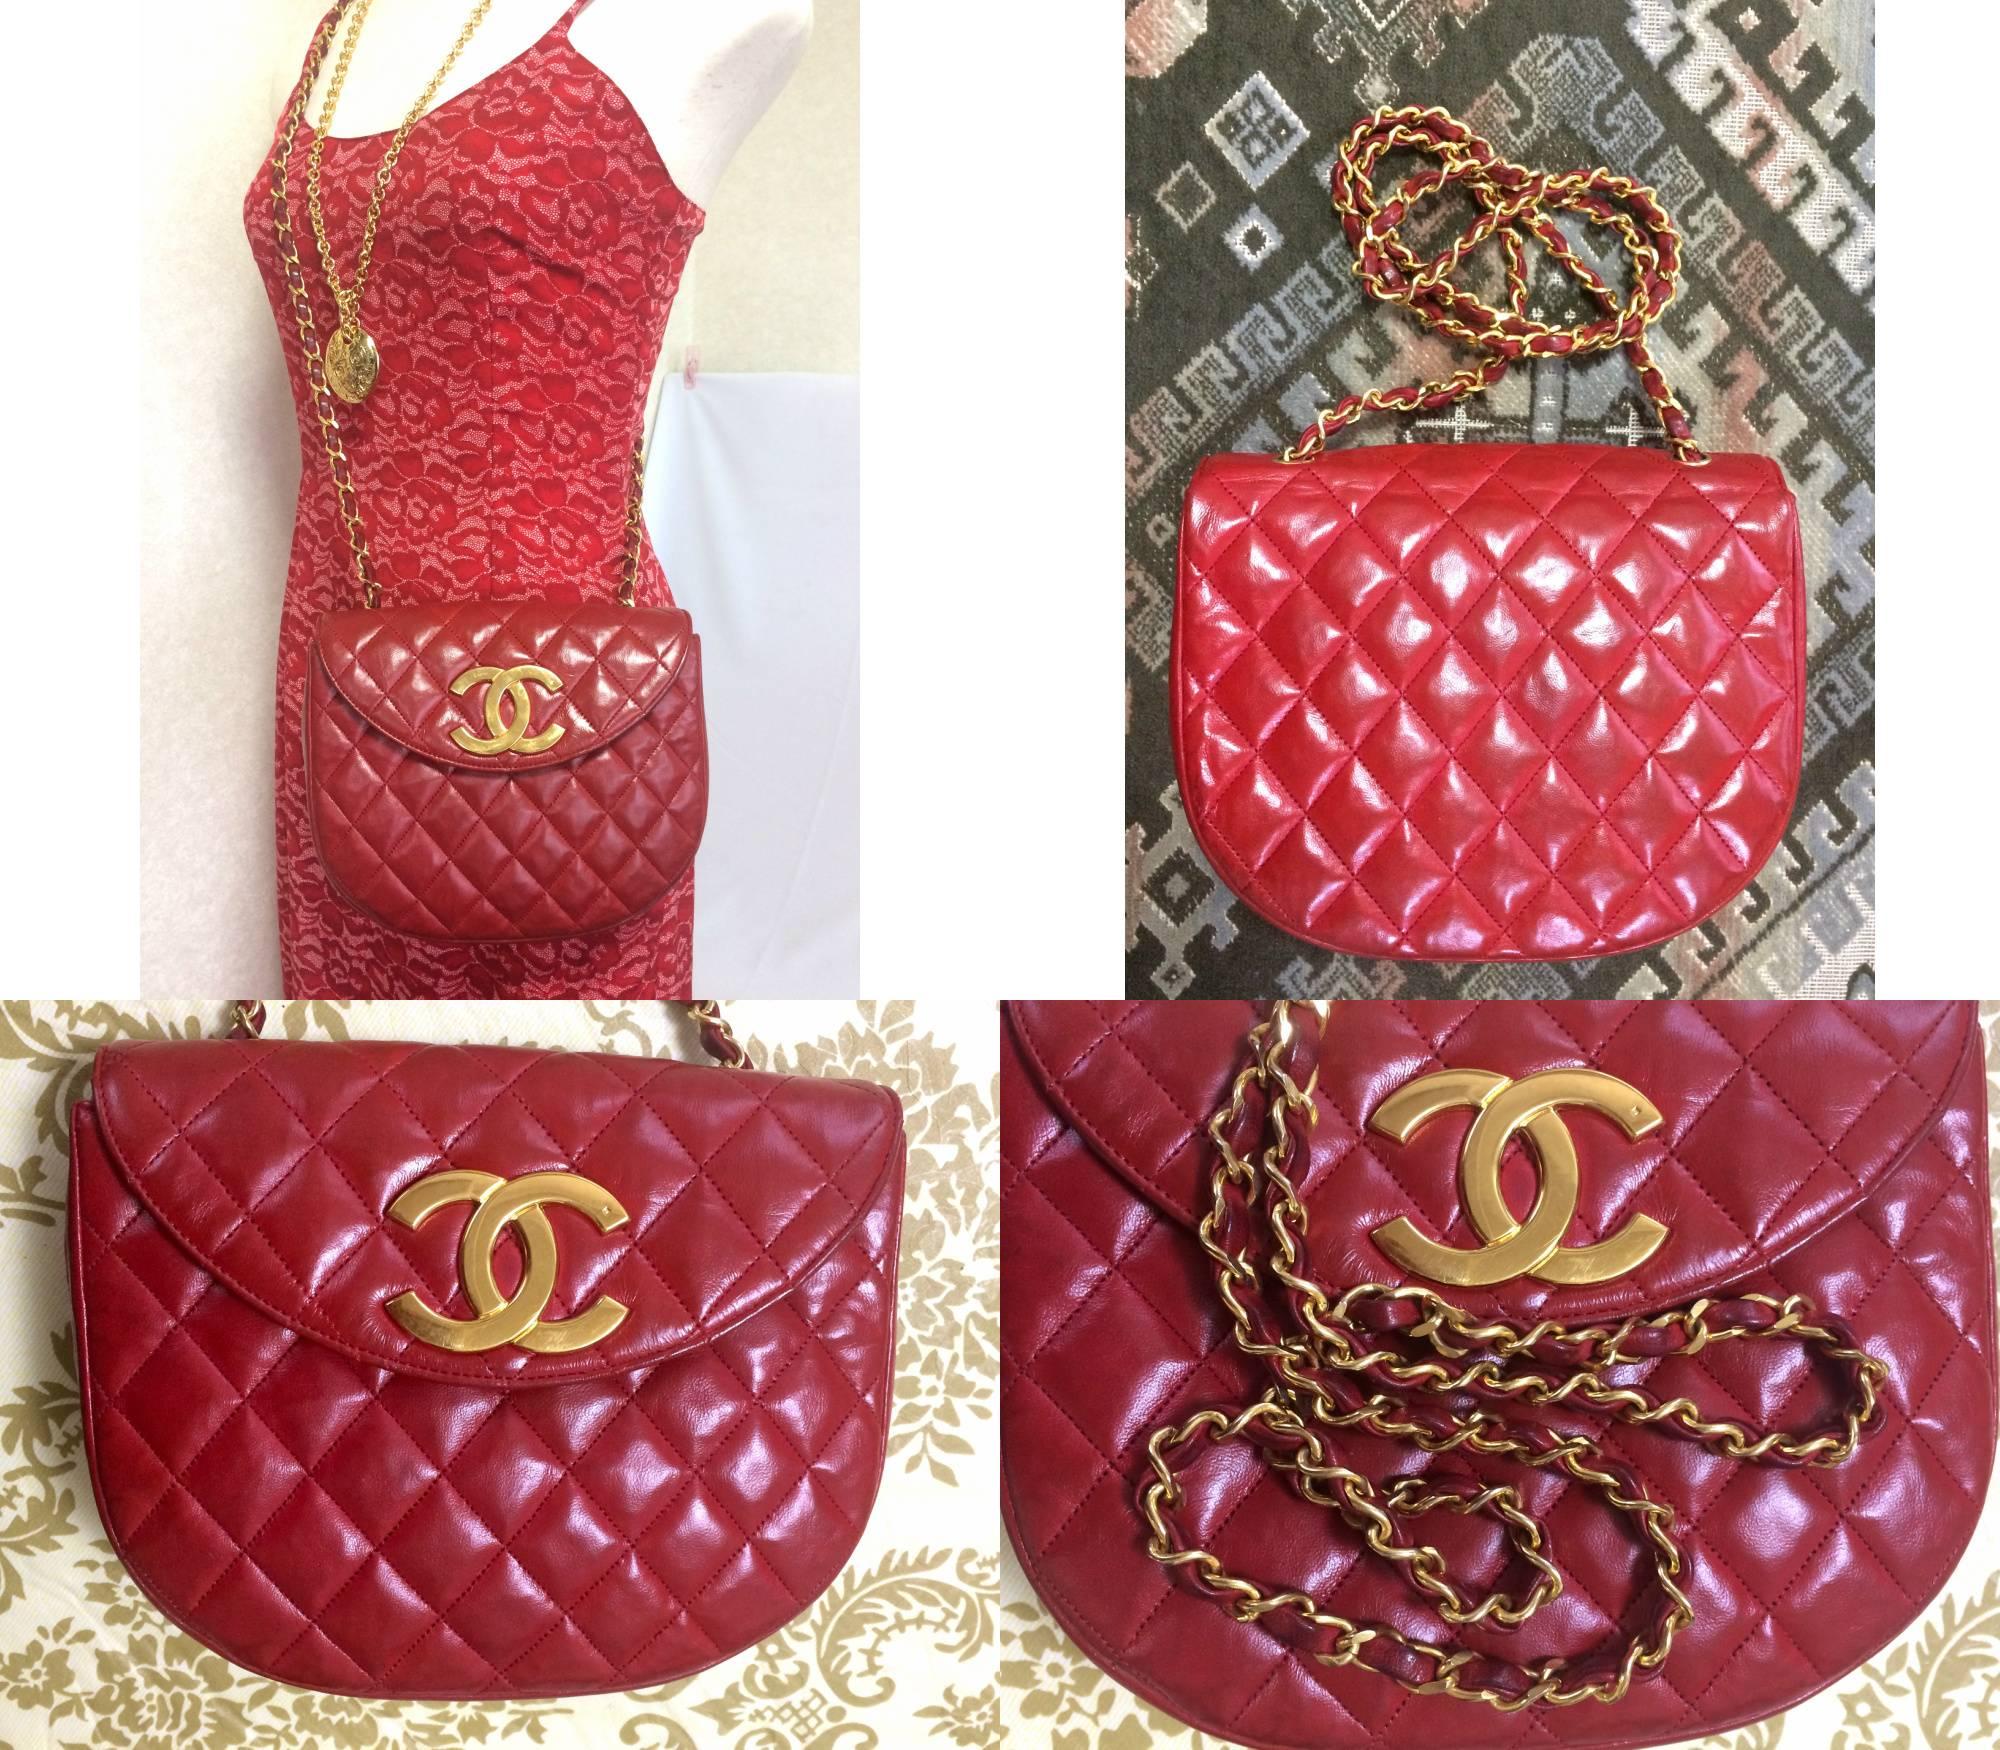 Vintage CHANEL rare red lambskin oval flap 2.55 shoulder bag with large gold CC. For Sale 1